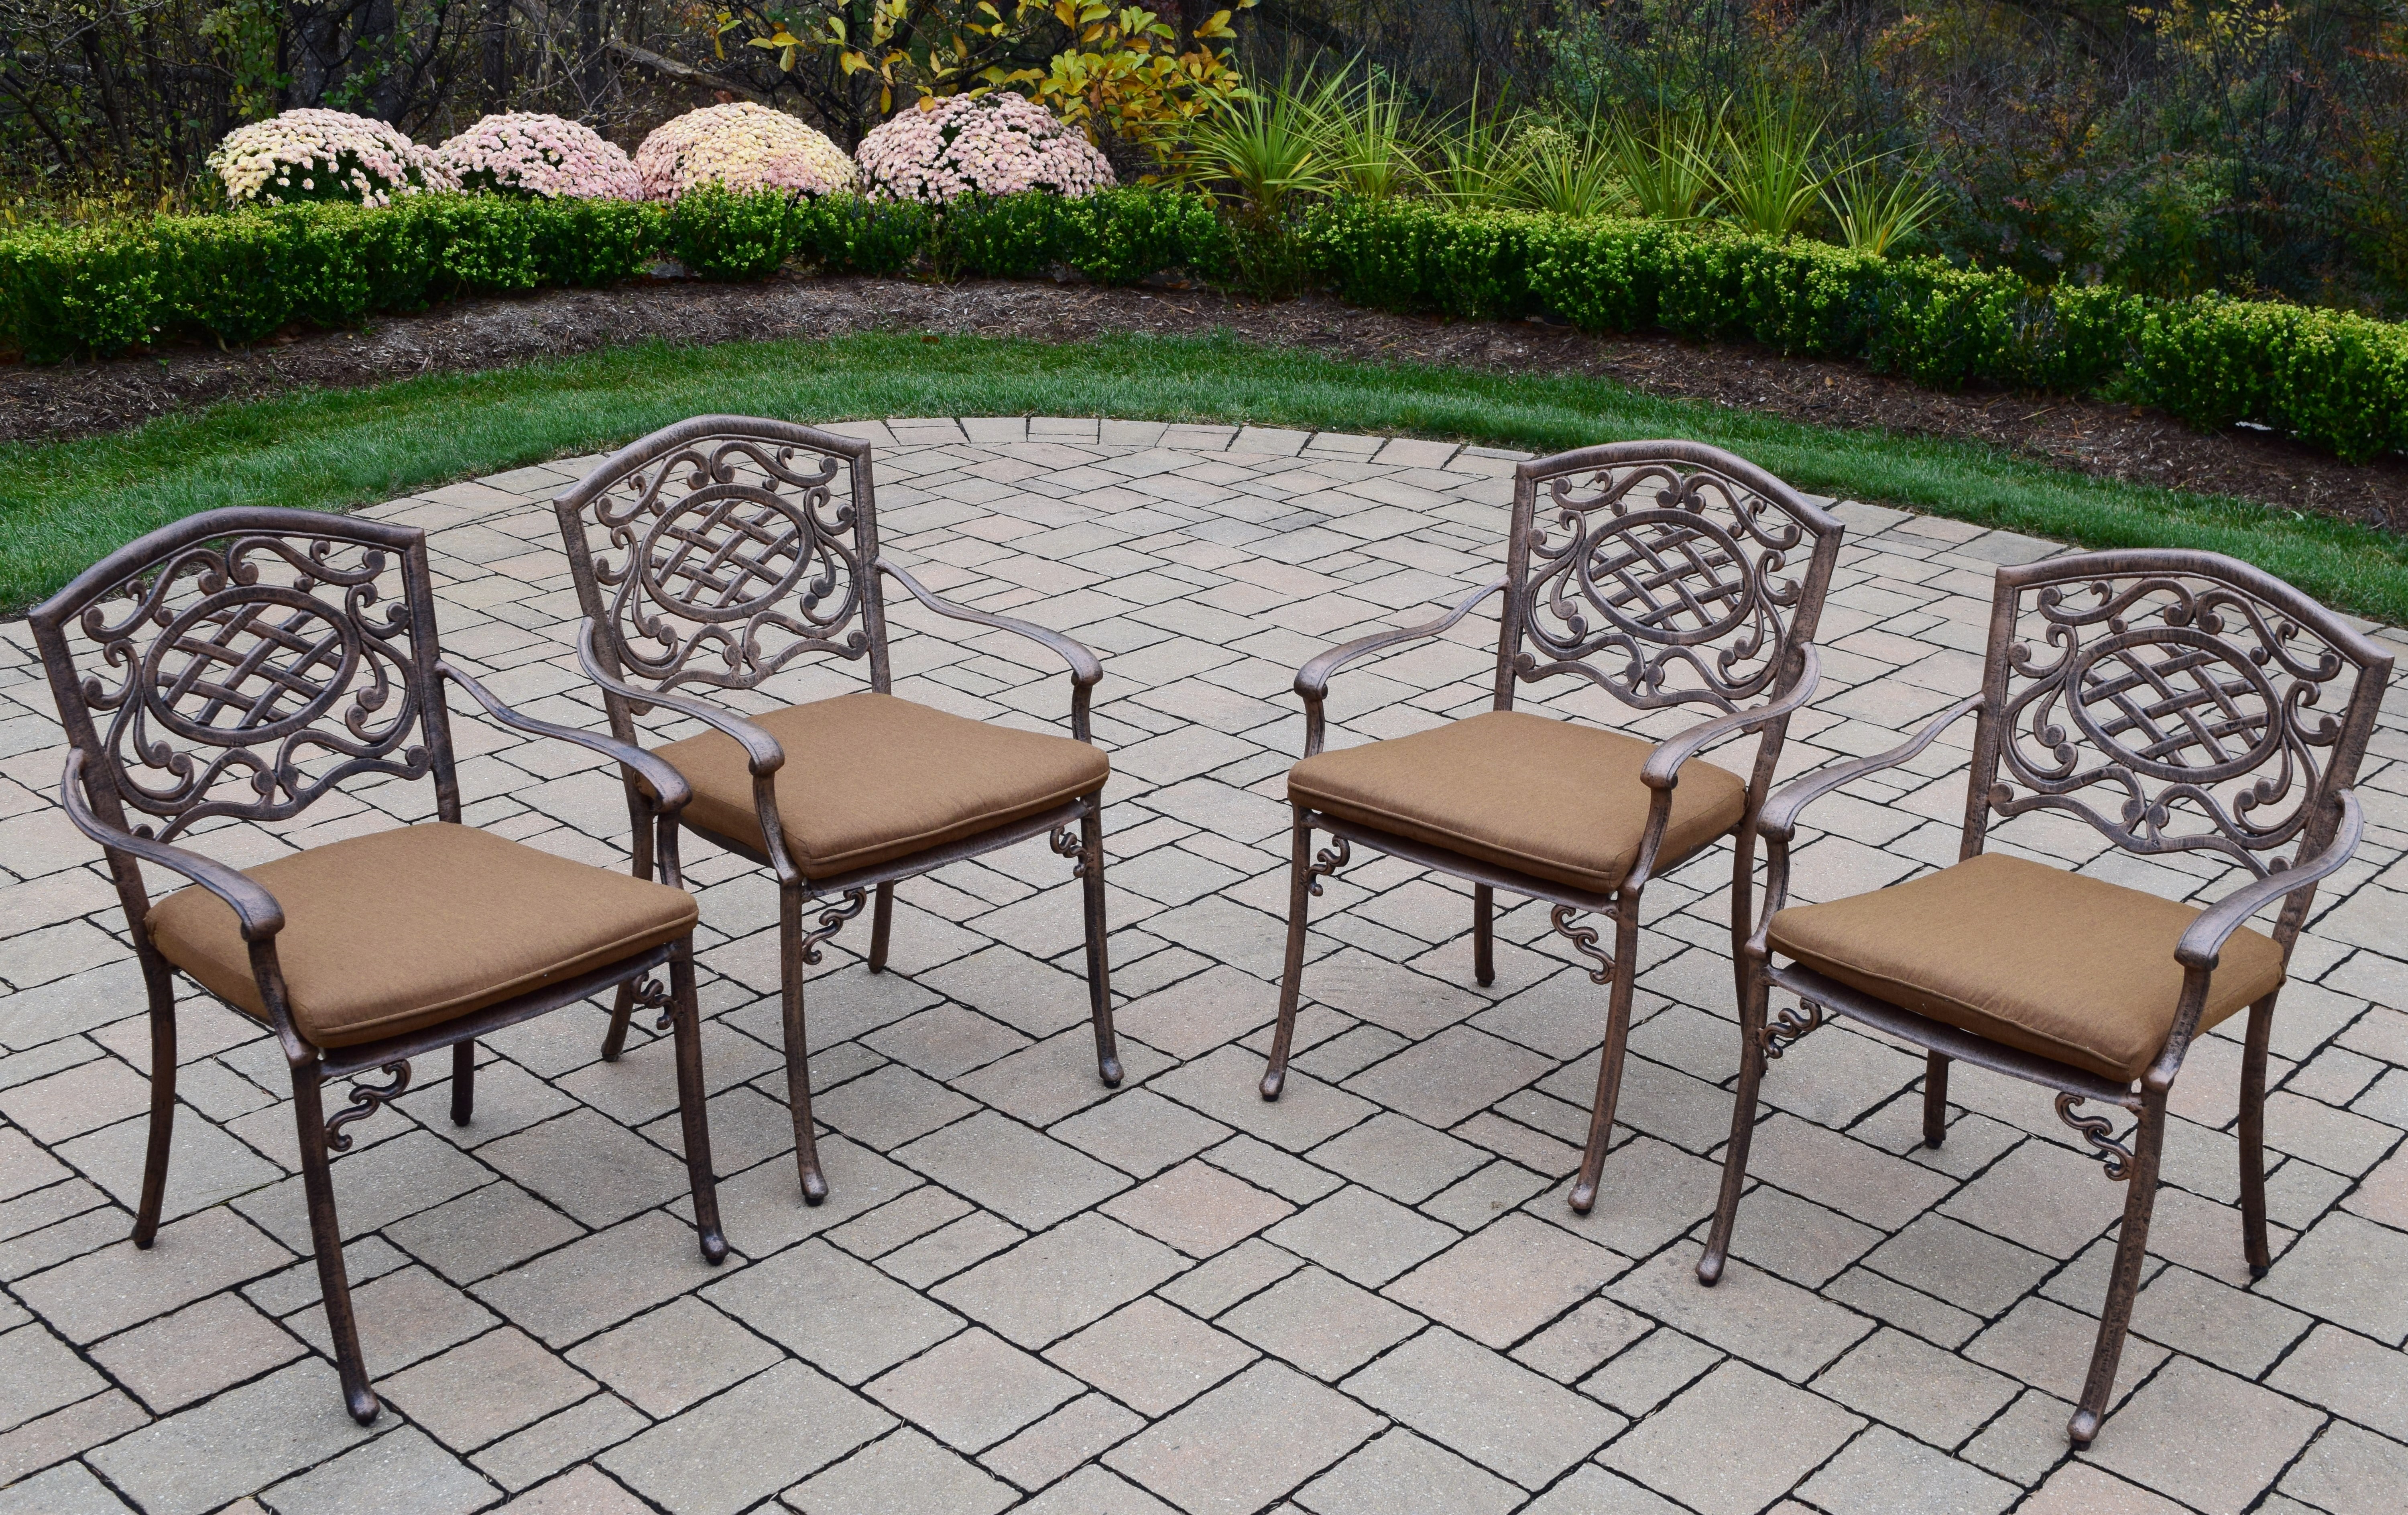 Oakland Living Cast Aluminum 5 Pc. Patio Dining set w/ Table & Sunbrella fabric Cushioned stackable Chairs